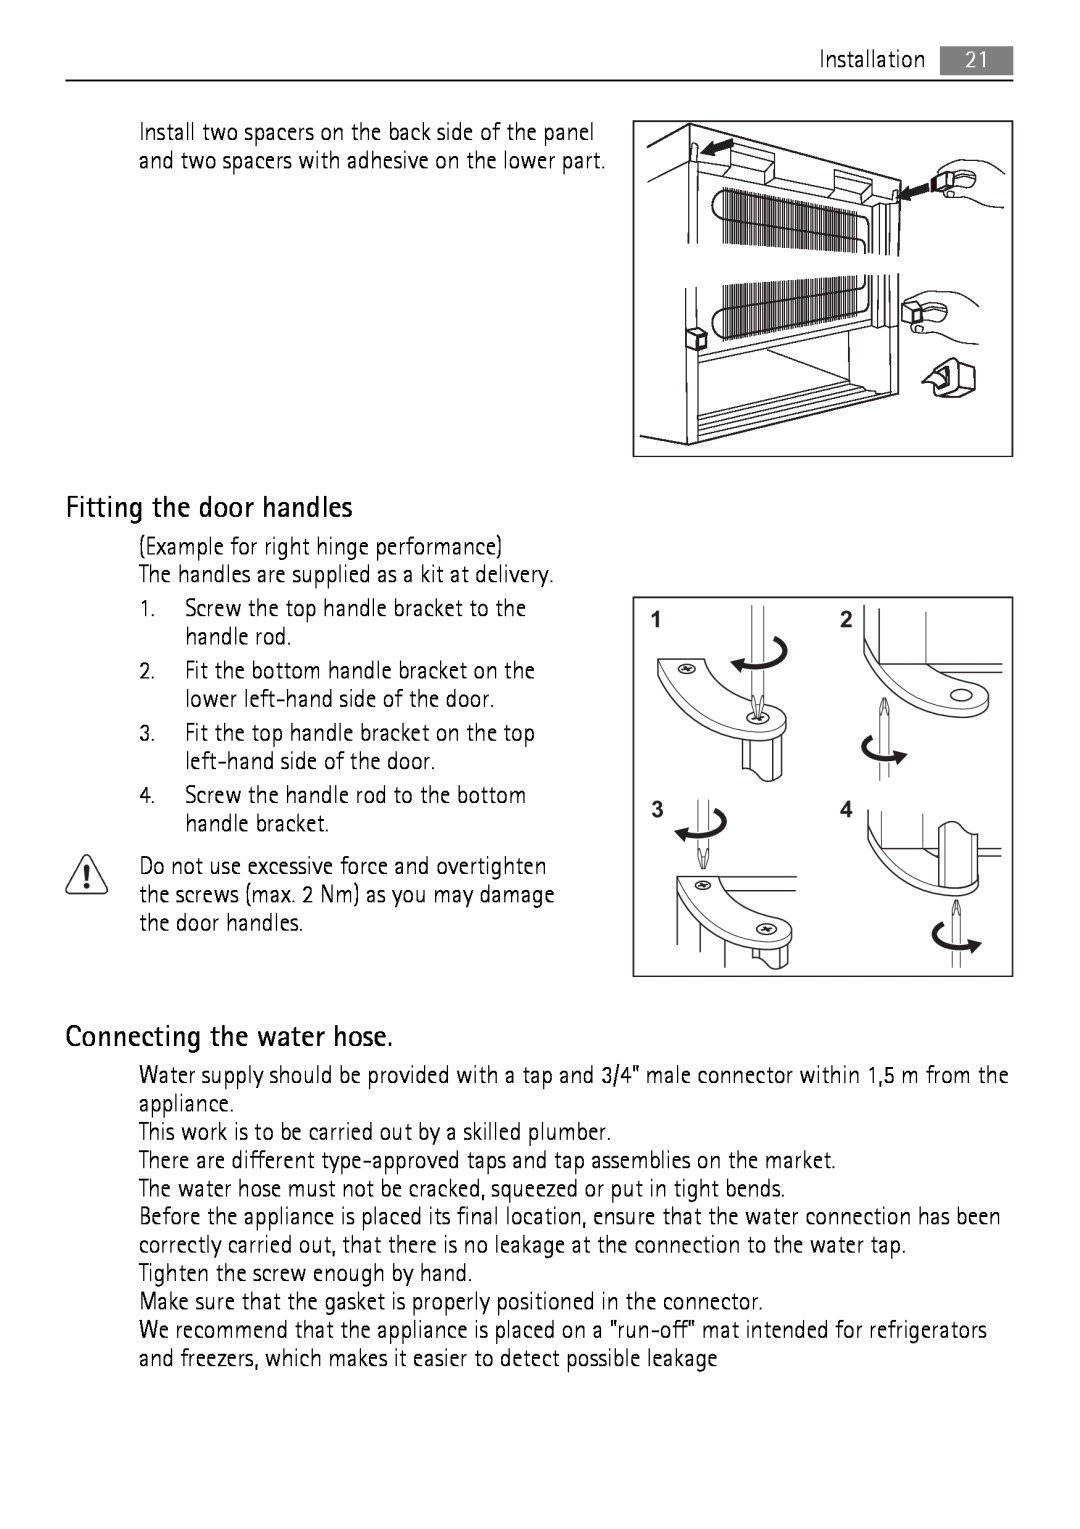 AEG A92860GNB0 user manual Fitting the door handles, Connecting the water hose 